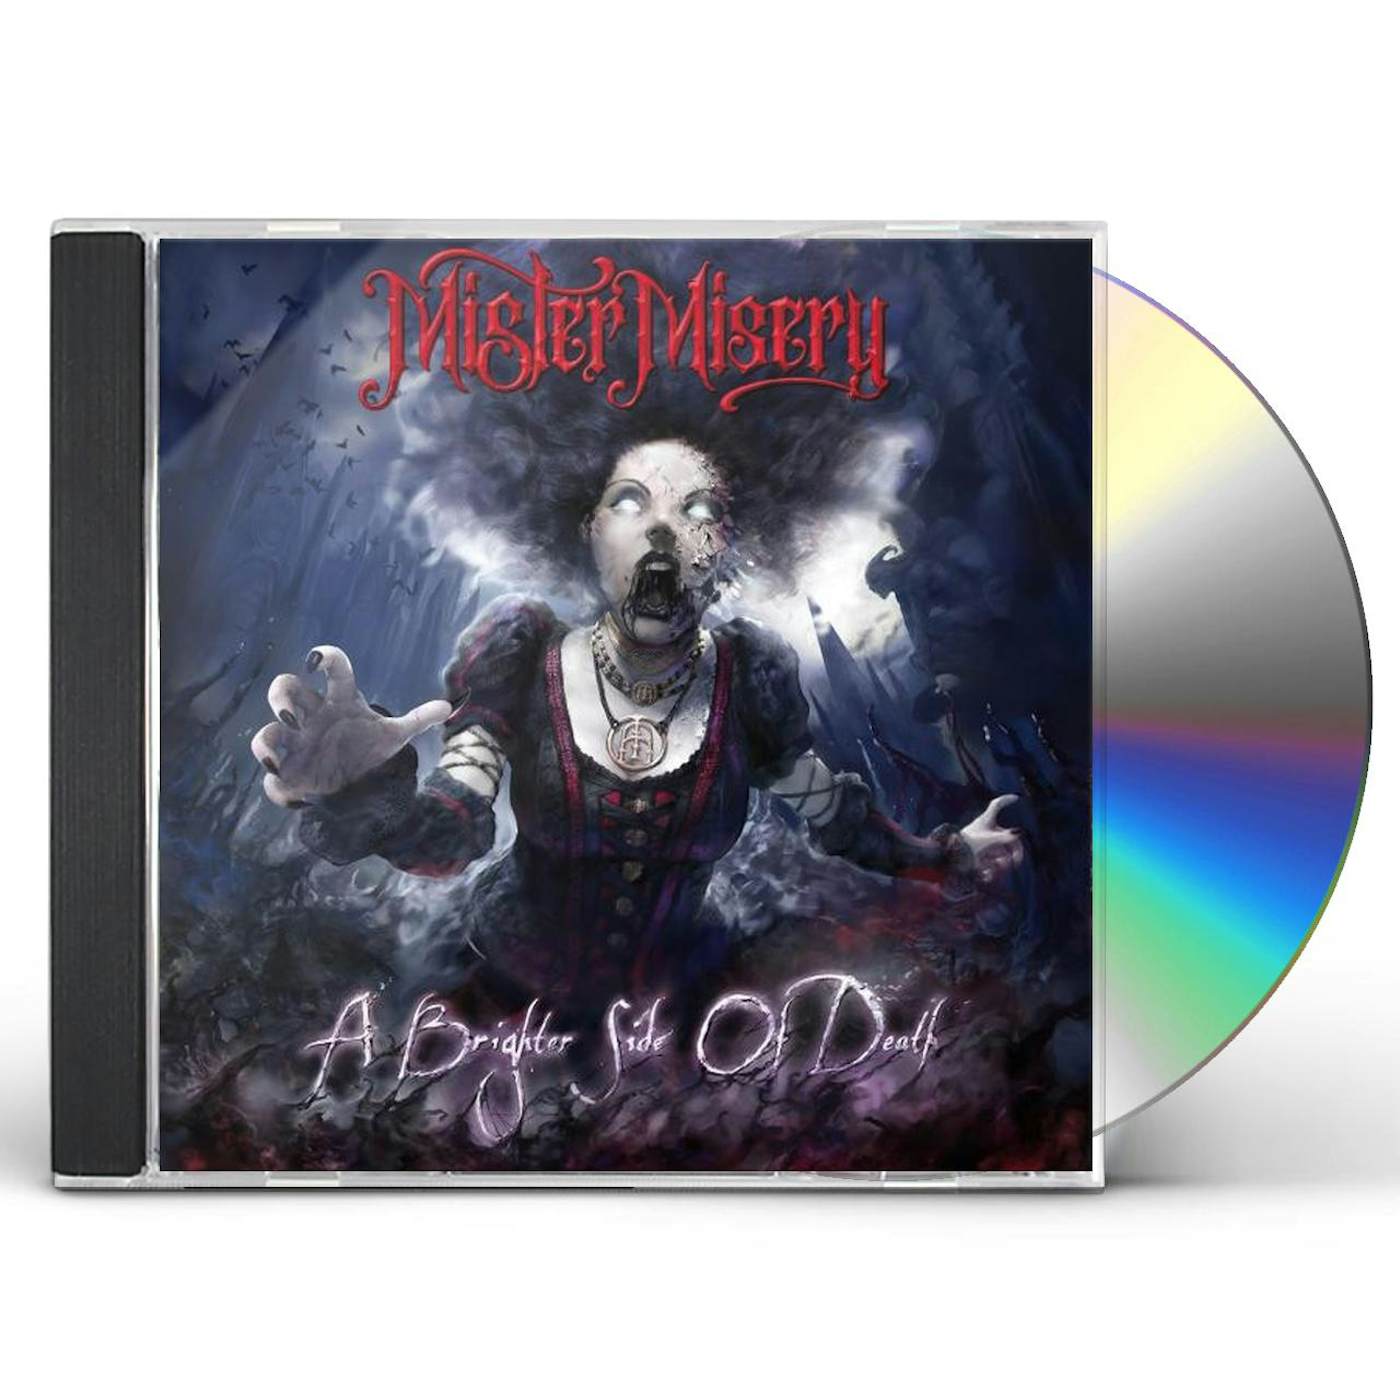 Mister Misery BRIGHTER SIDE OF DEATH CD